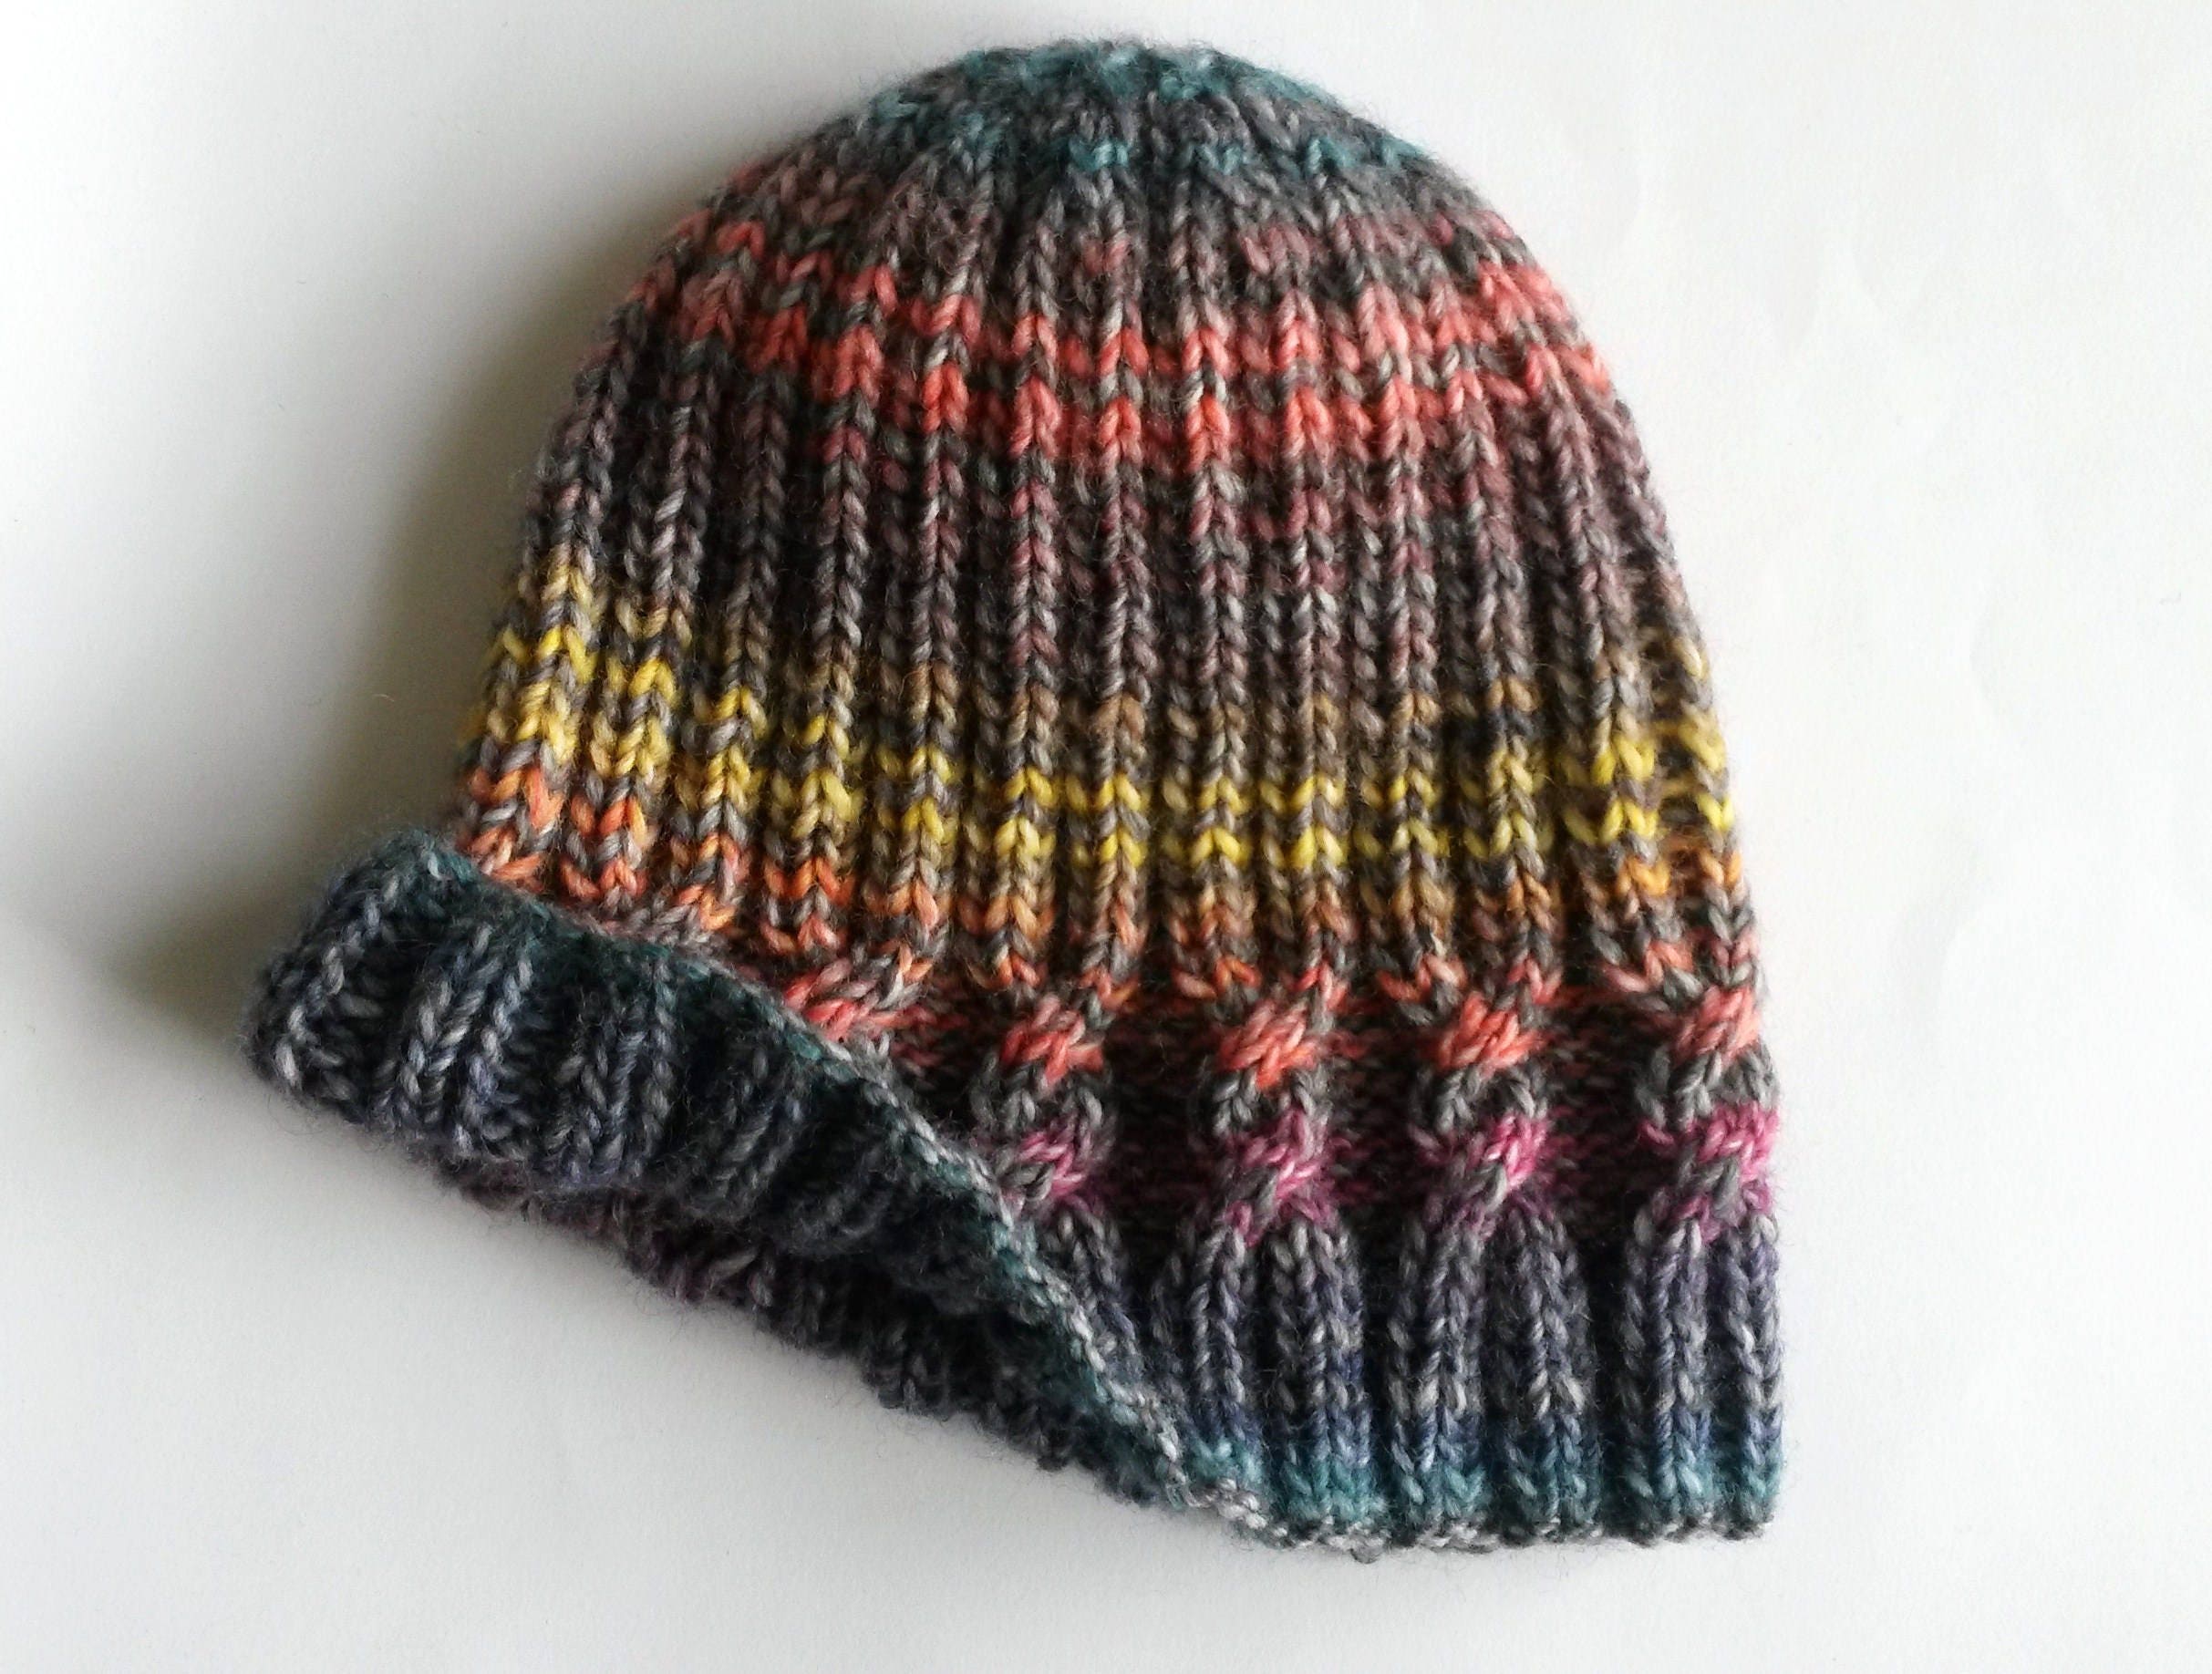 Knitting pattern instant download PDF. Beanie hat pattern. Cable knit